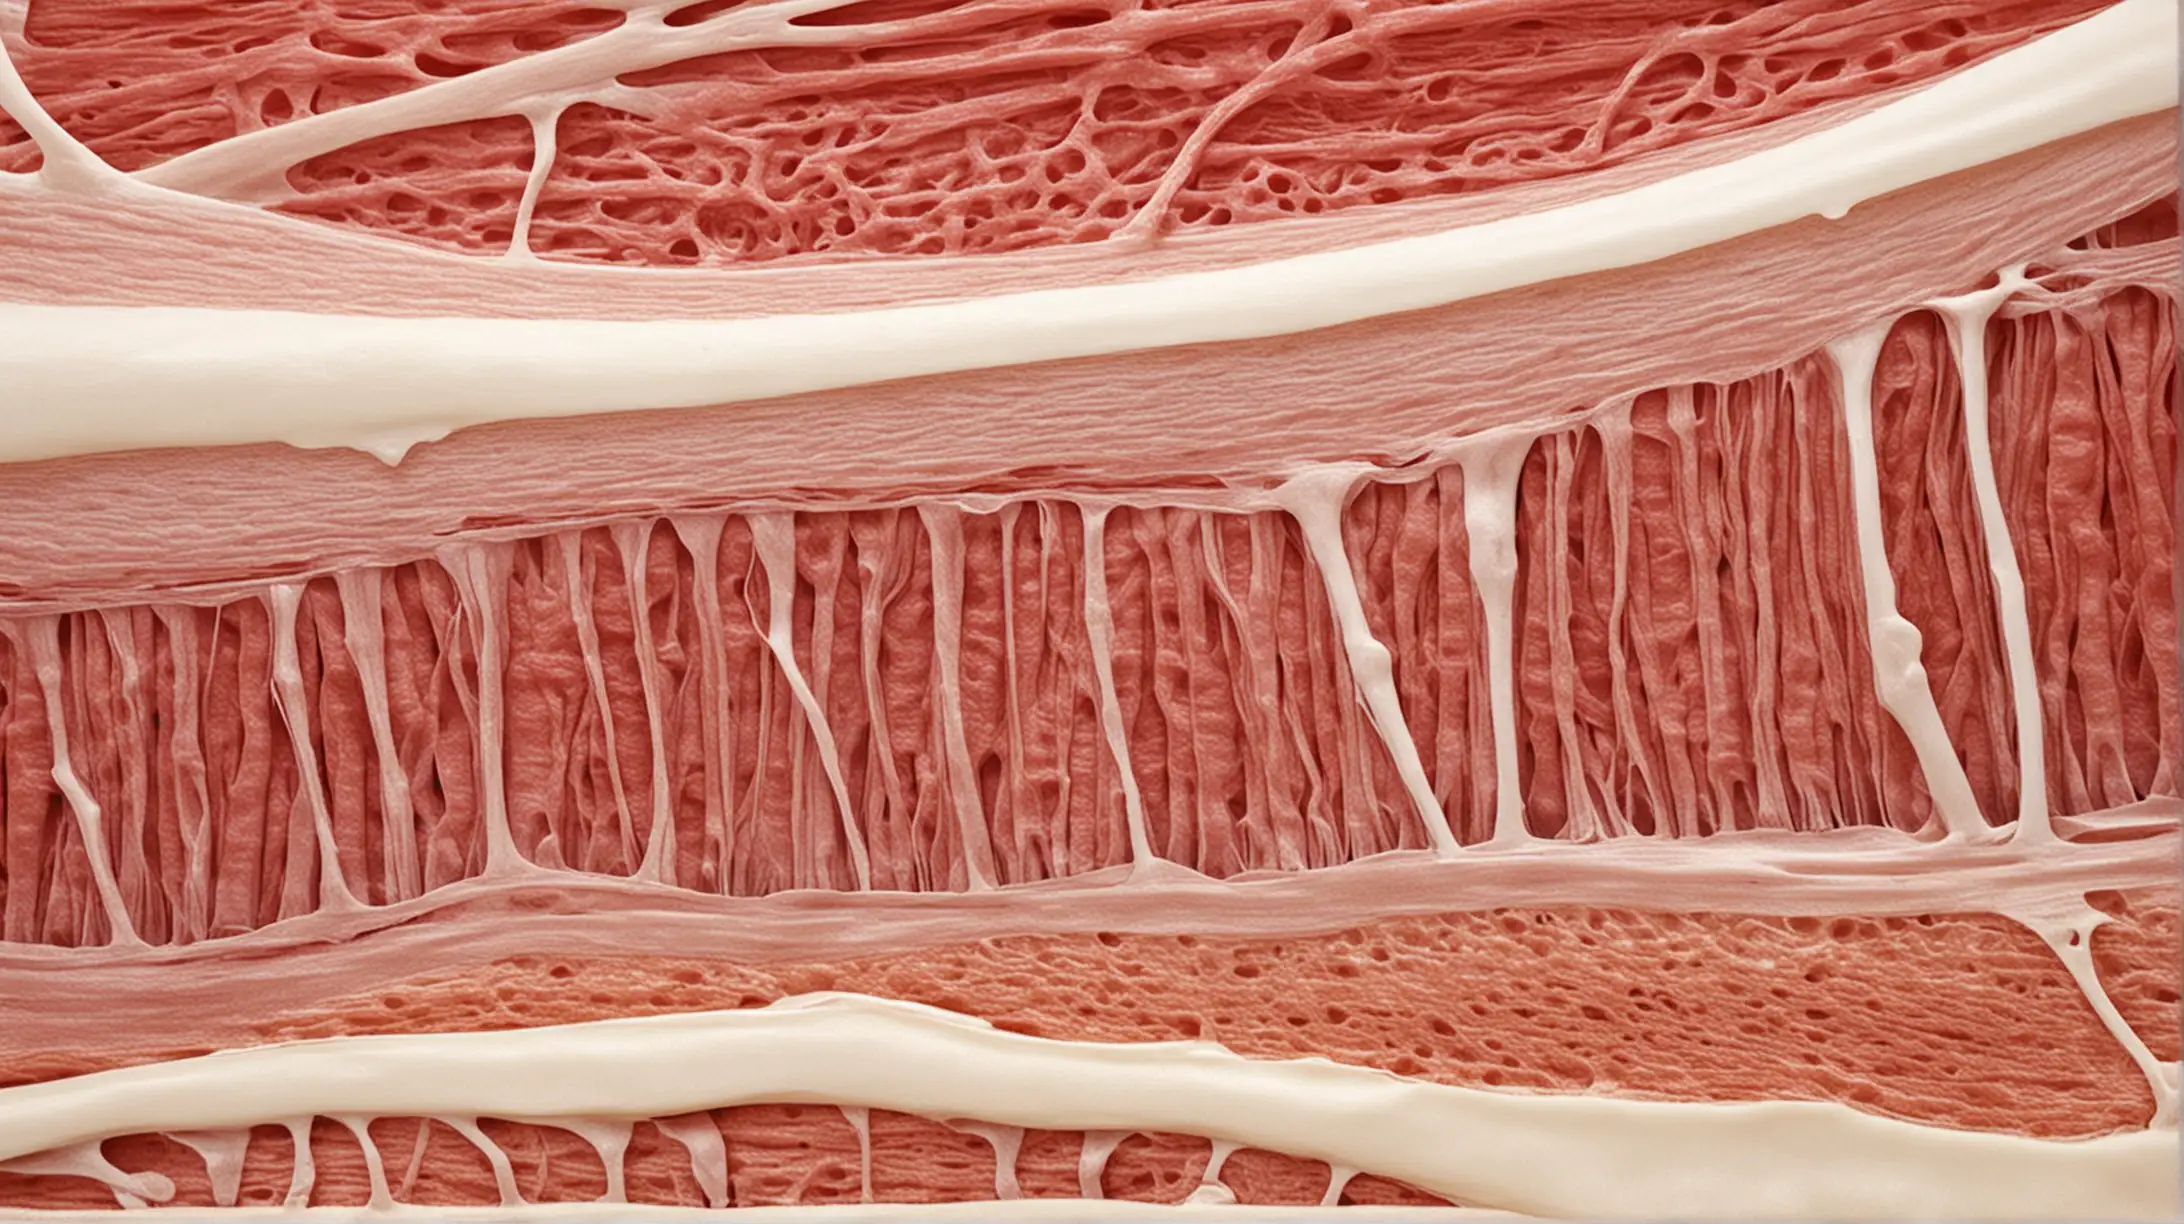 bone and muscle tissue

